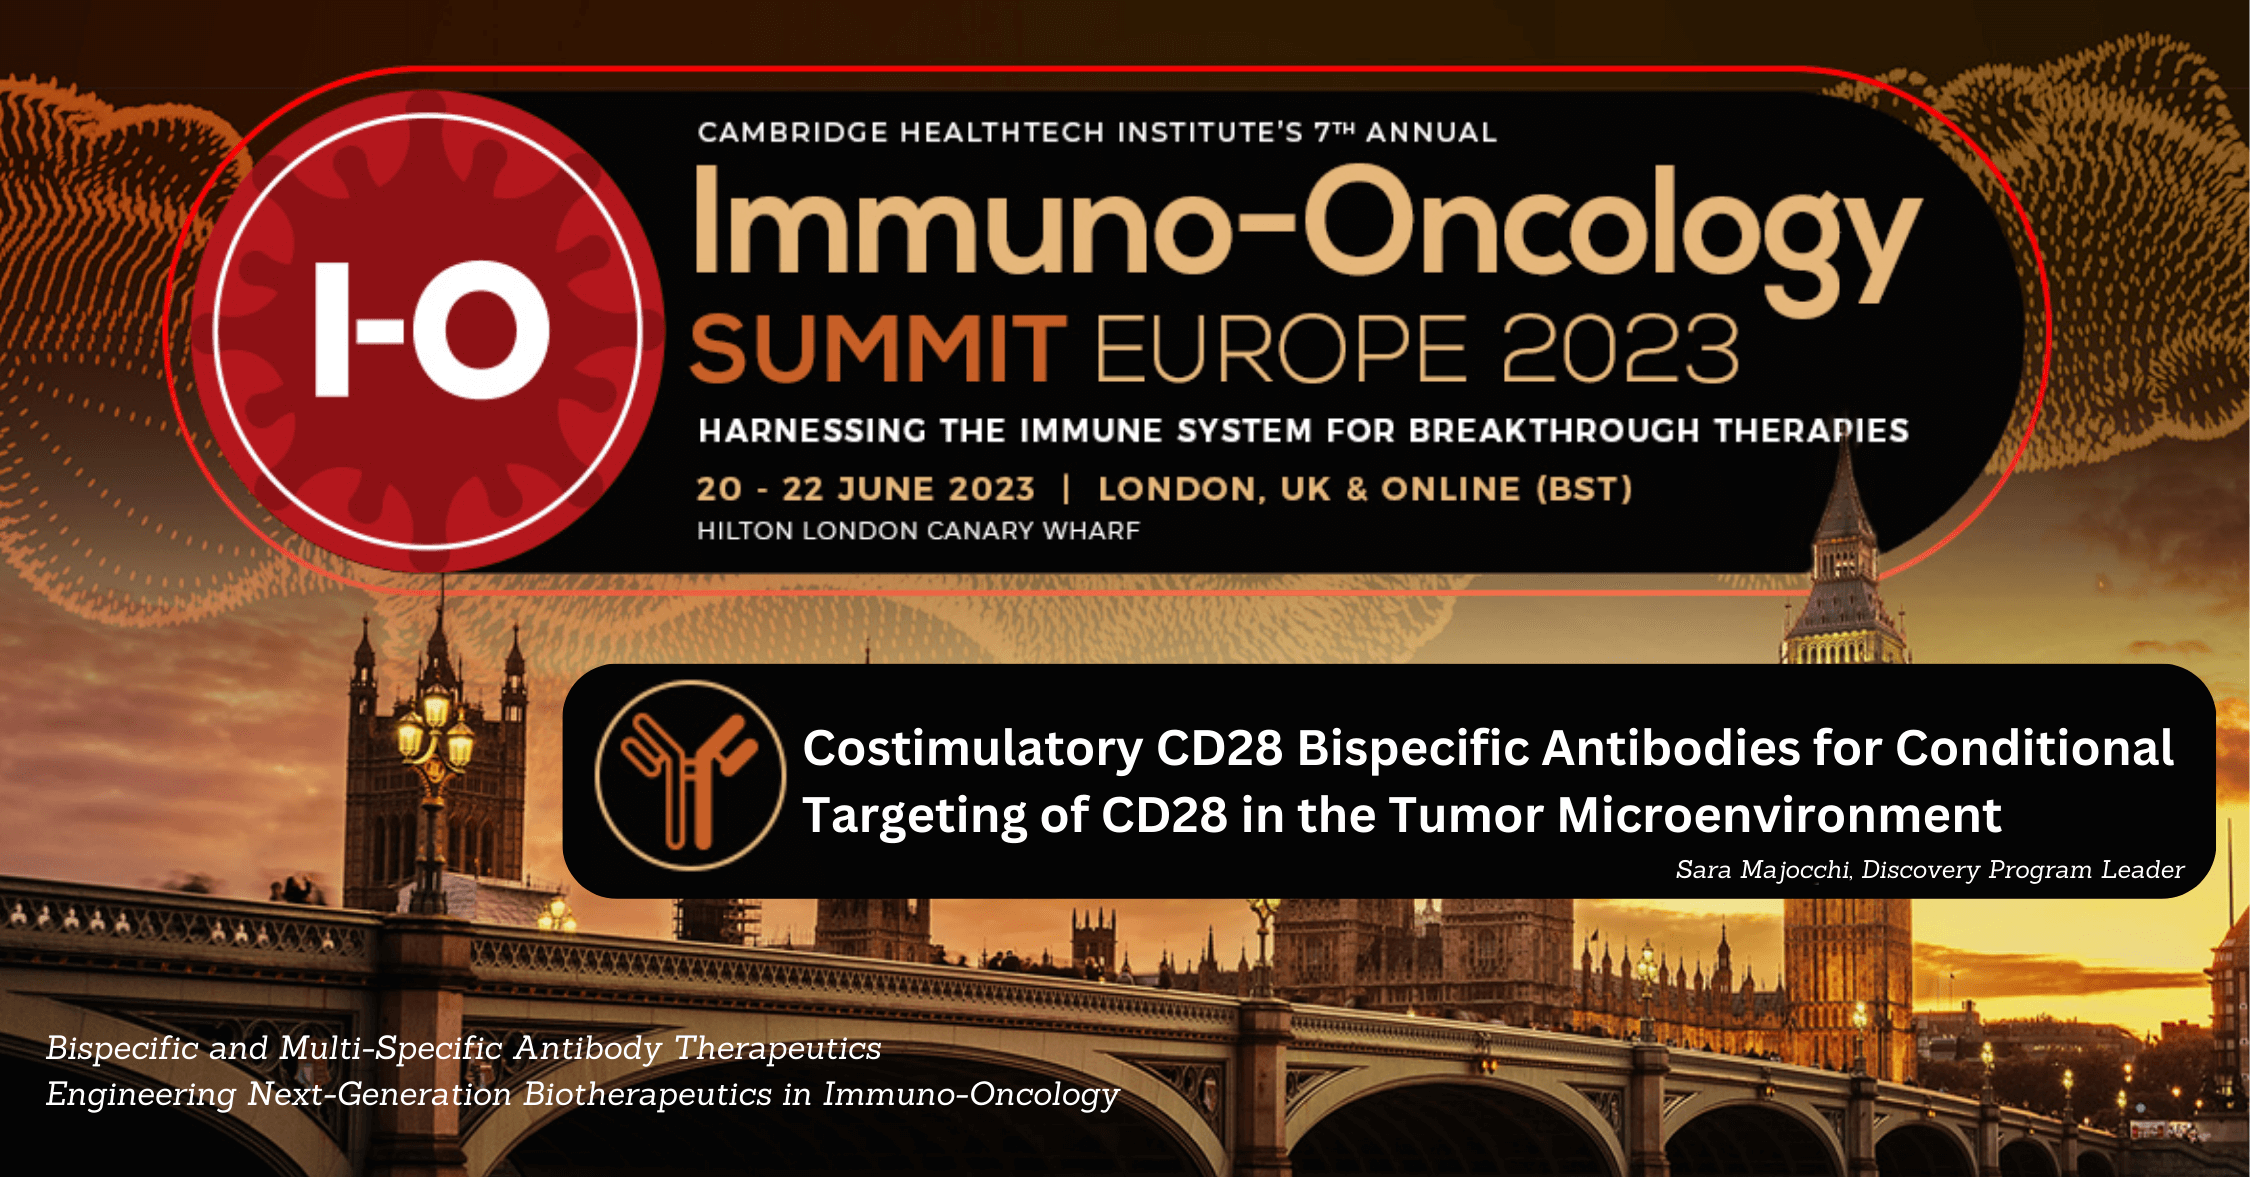 7th Annual Immuno-Oncology Summit Europe 2023